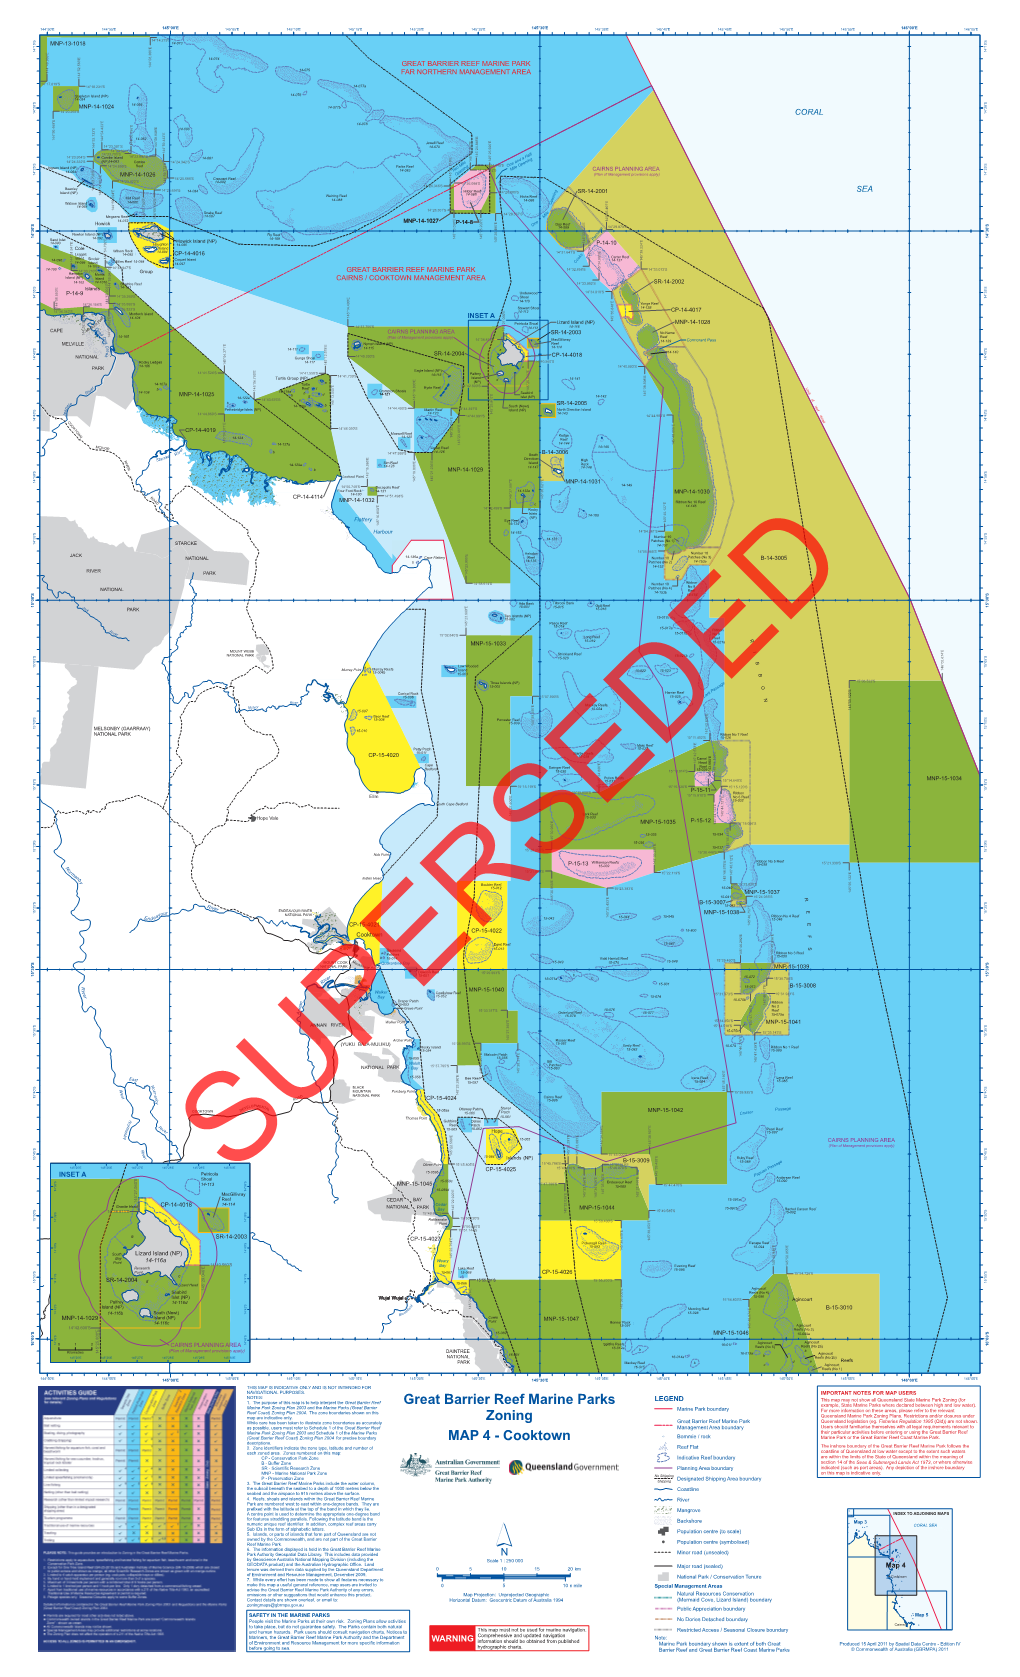 Great Barrier Reef Marine Parks Zoning MAP 4